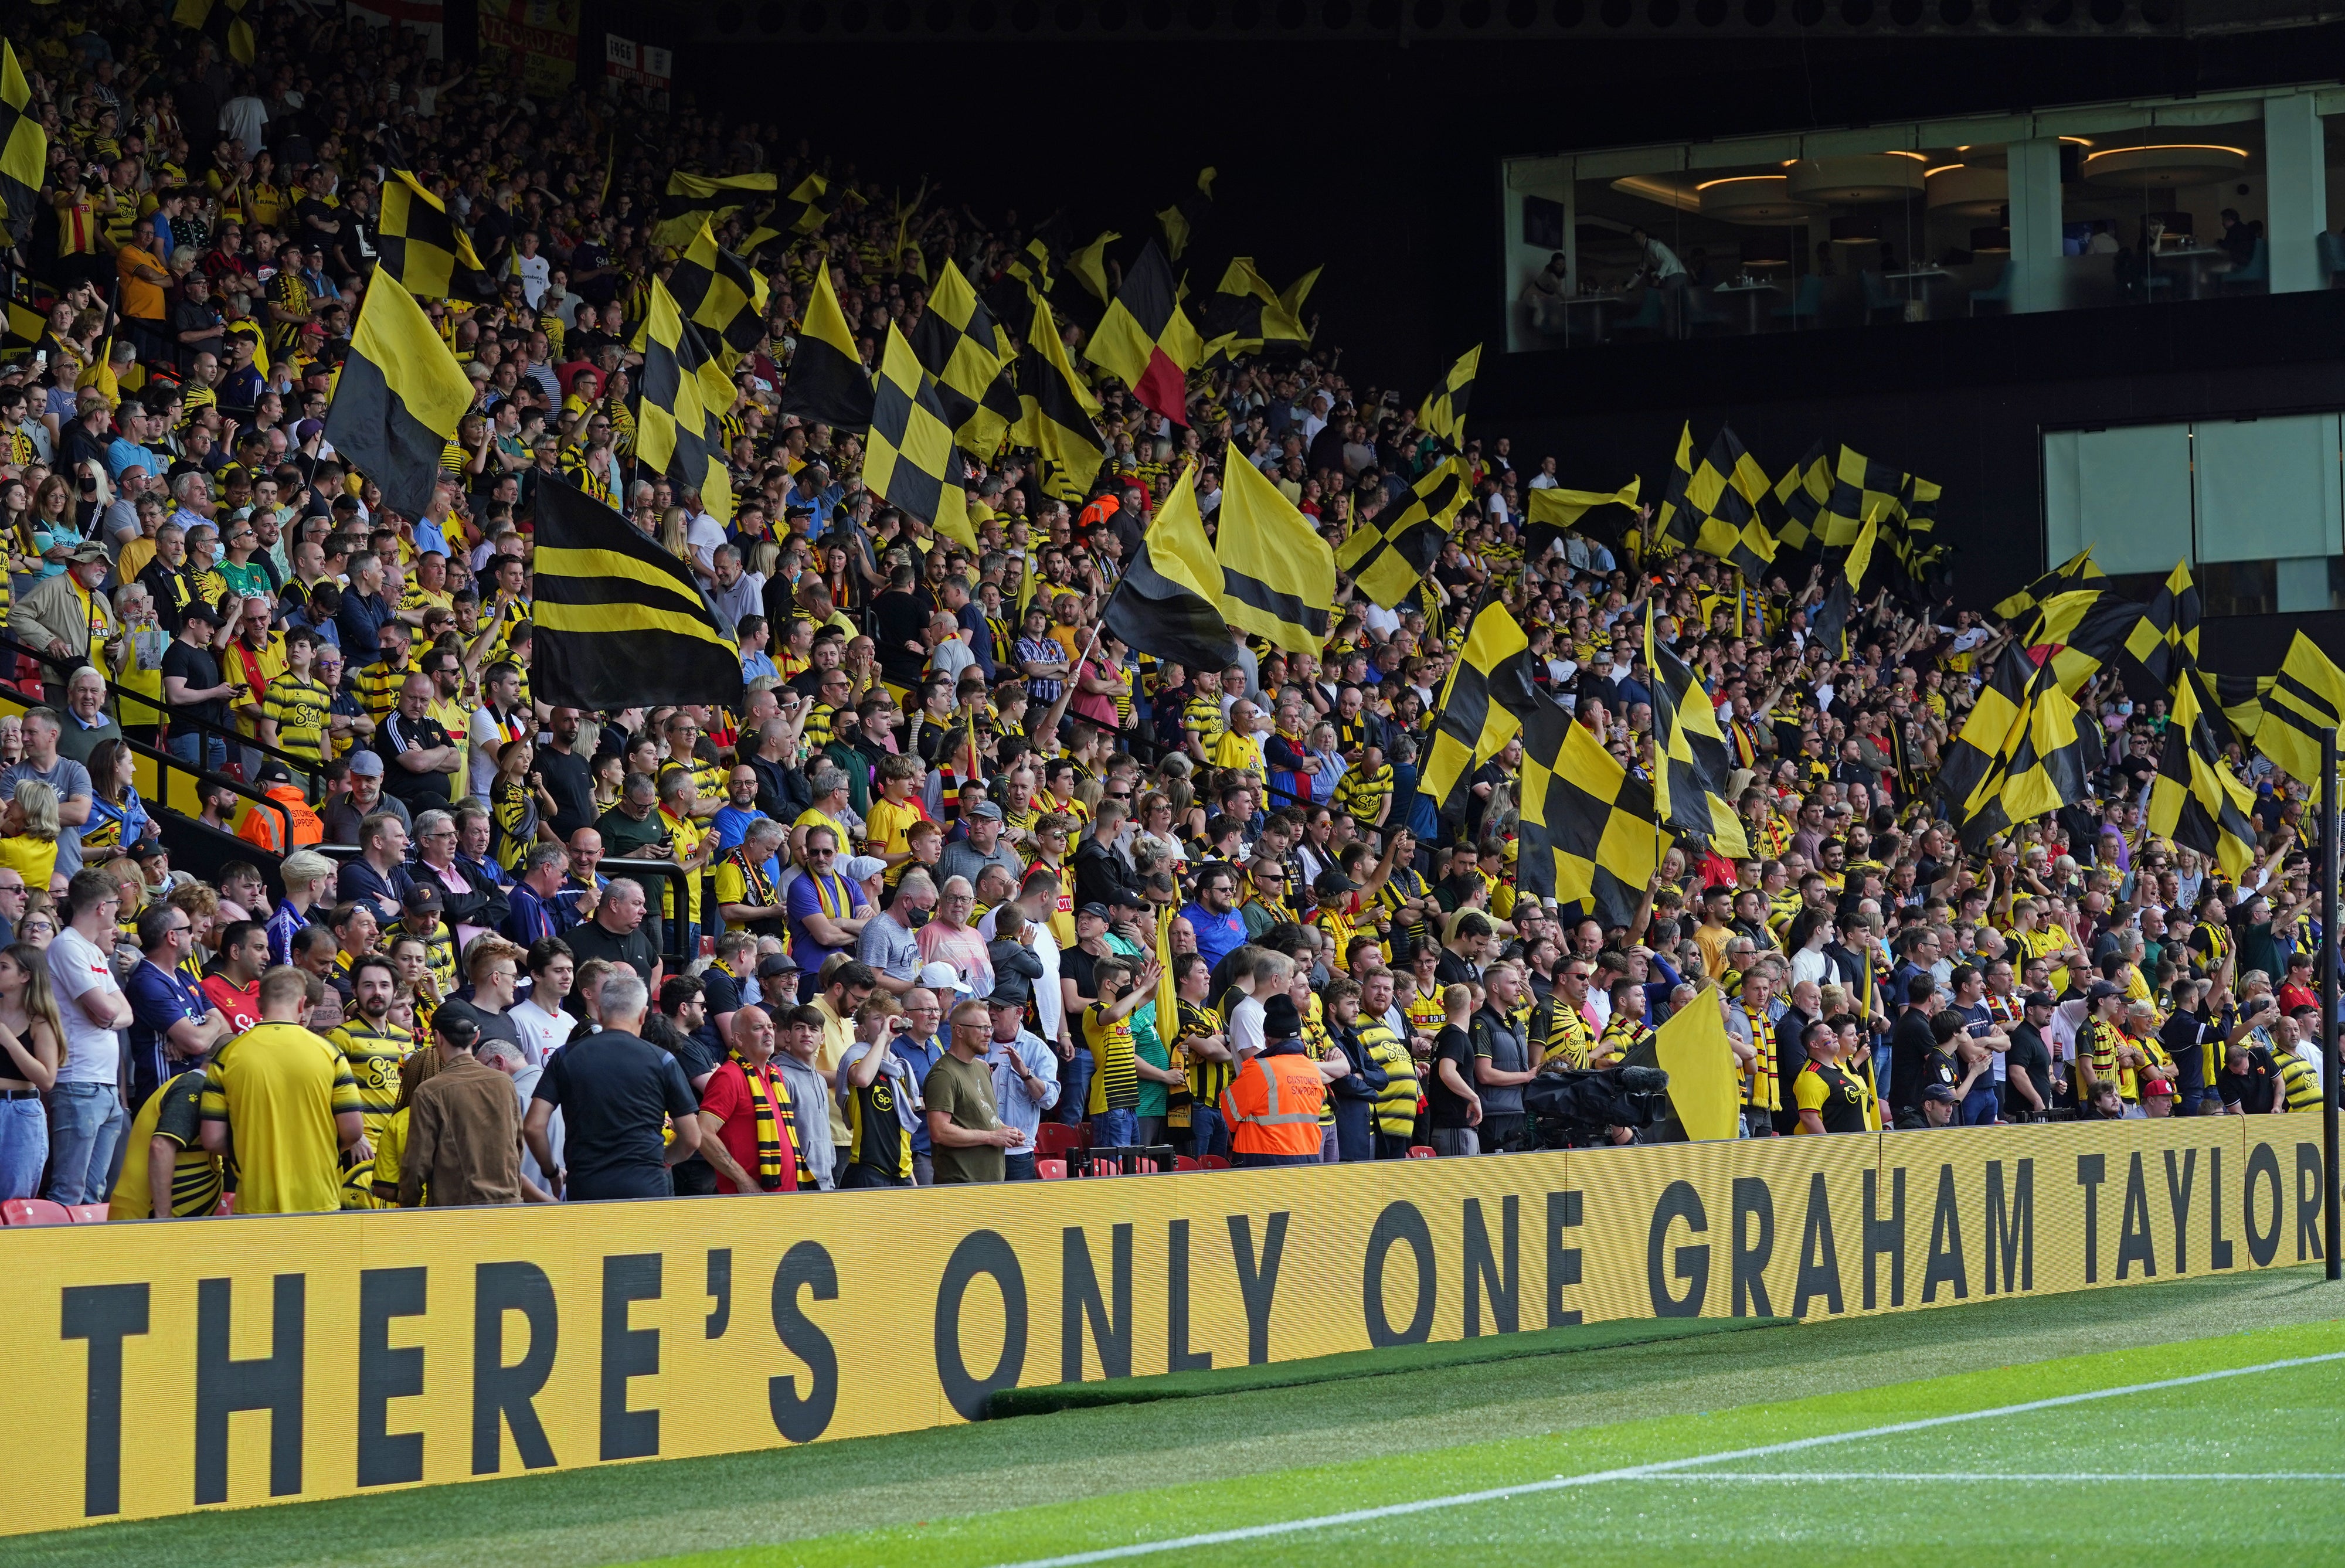 Watford fans returned on Graham Taylor day to celebrate the former England manager (Jonathan Brady/PA)